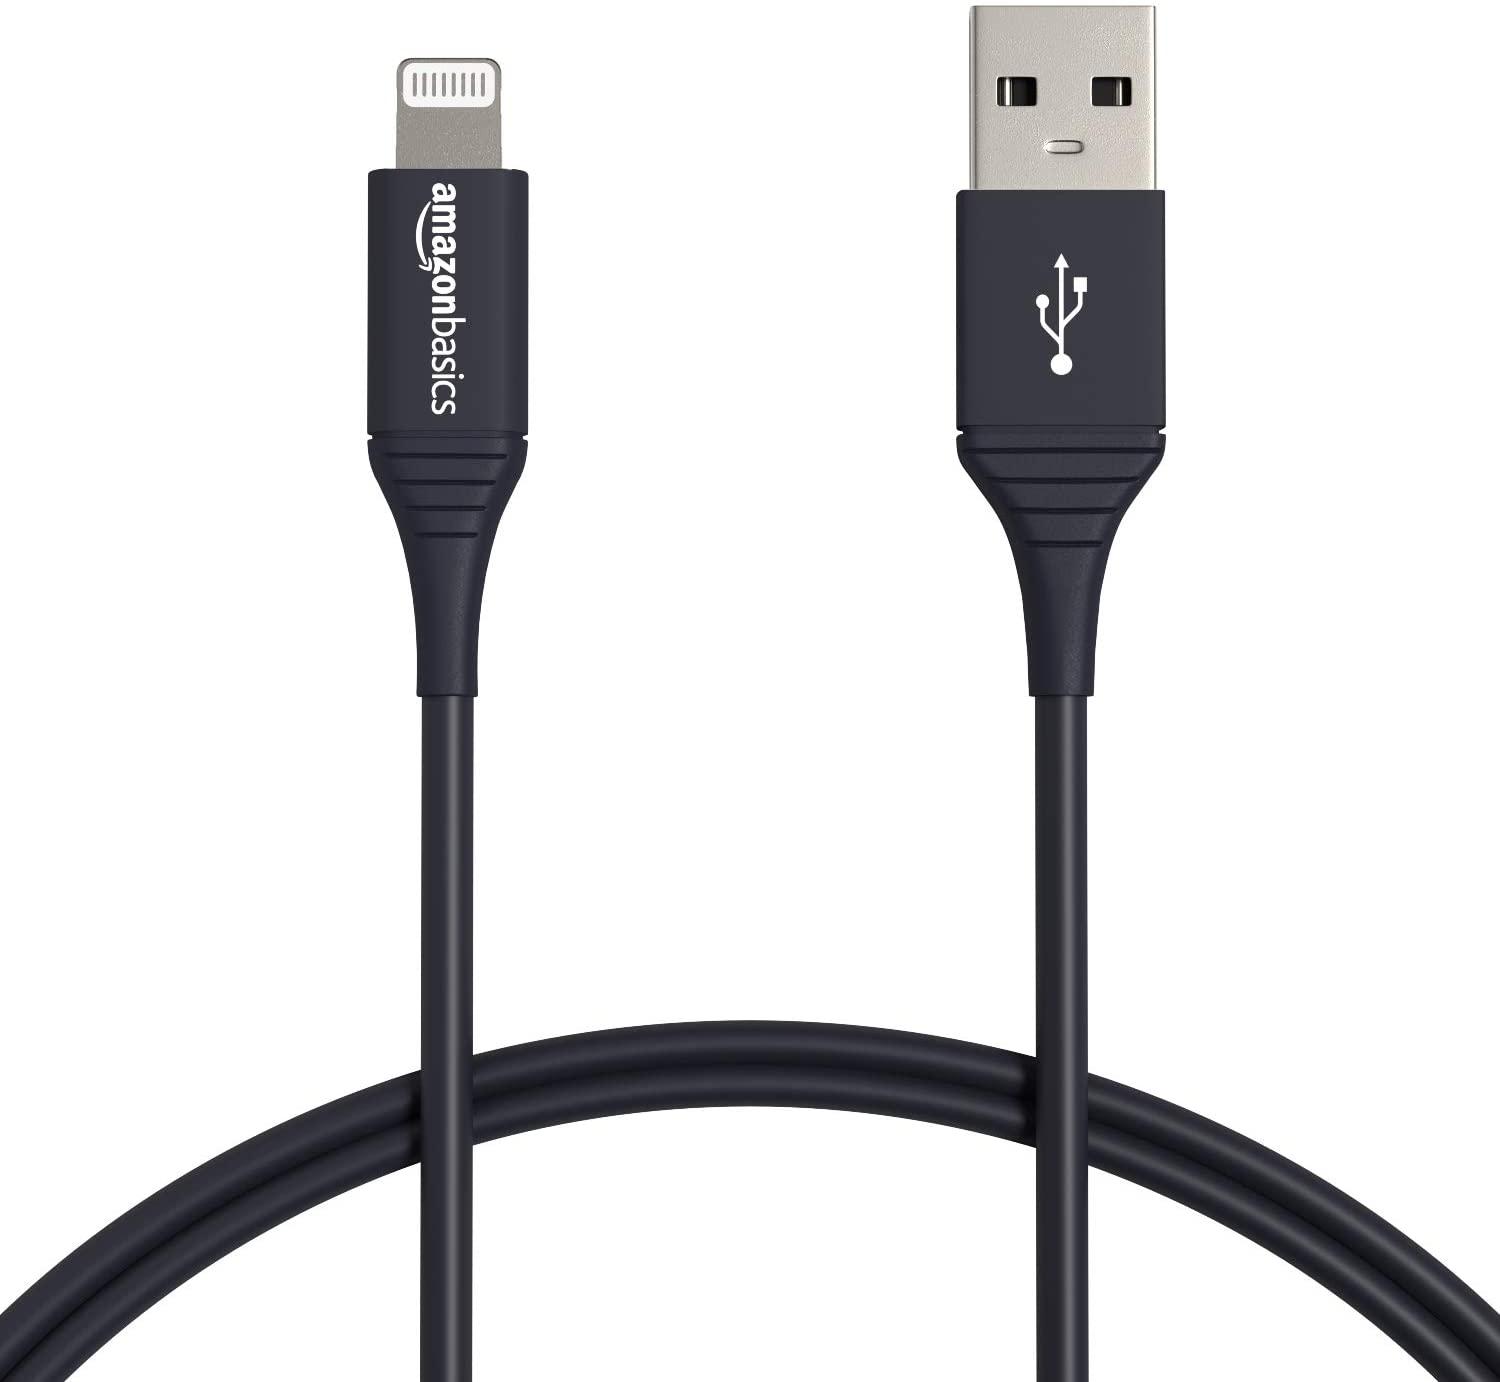 iPhone Amazon Basics USB-A to Lightning Charging Cable for $0.99